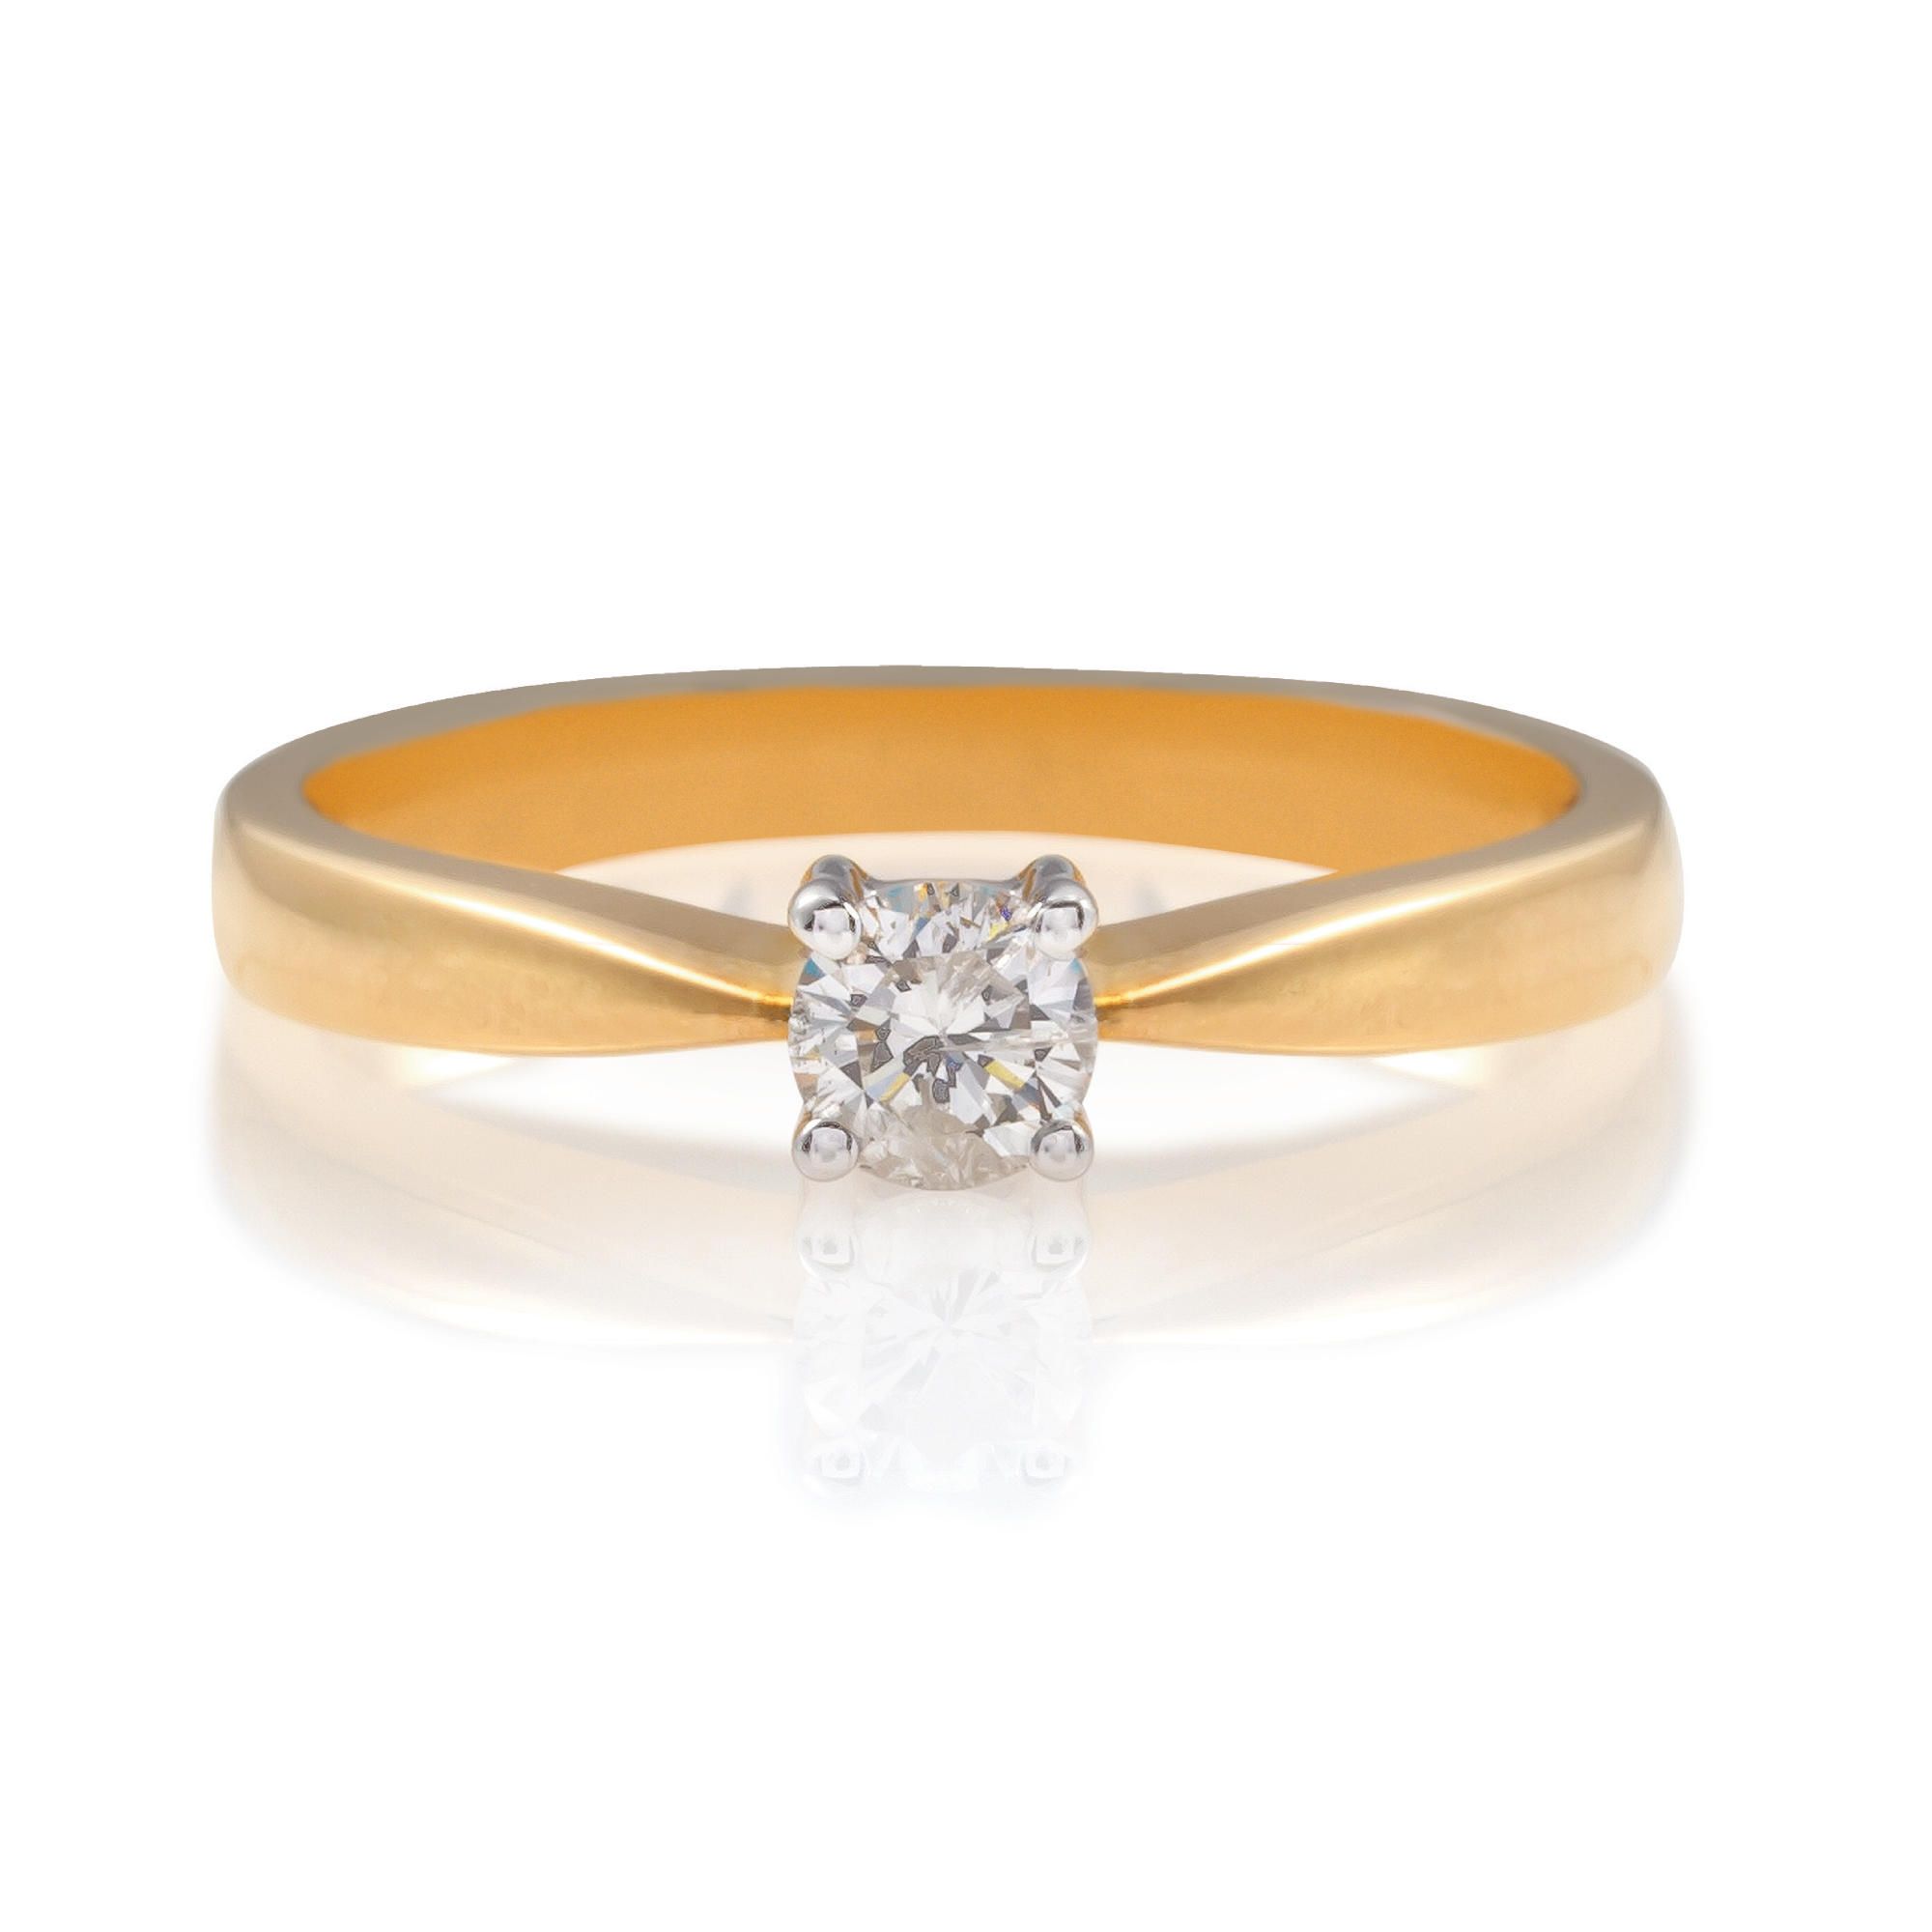 18ct Gold 25Pt Diamond Solitaire Ring, P at Tesco Direct